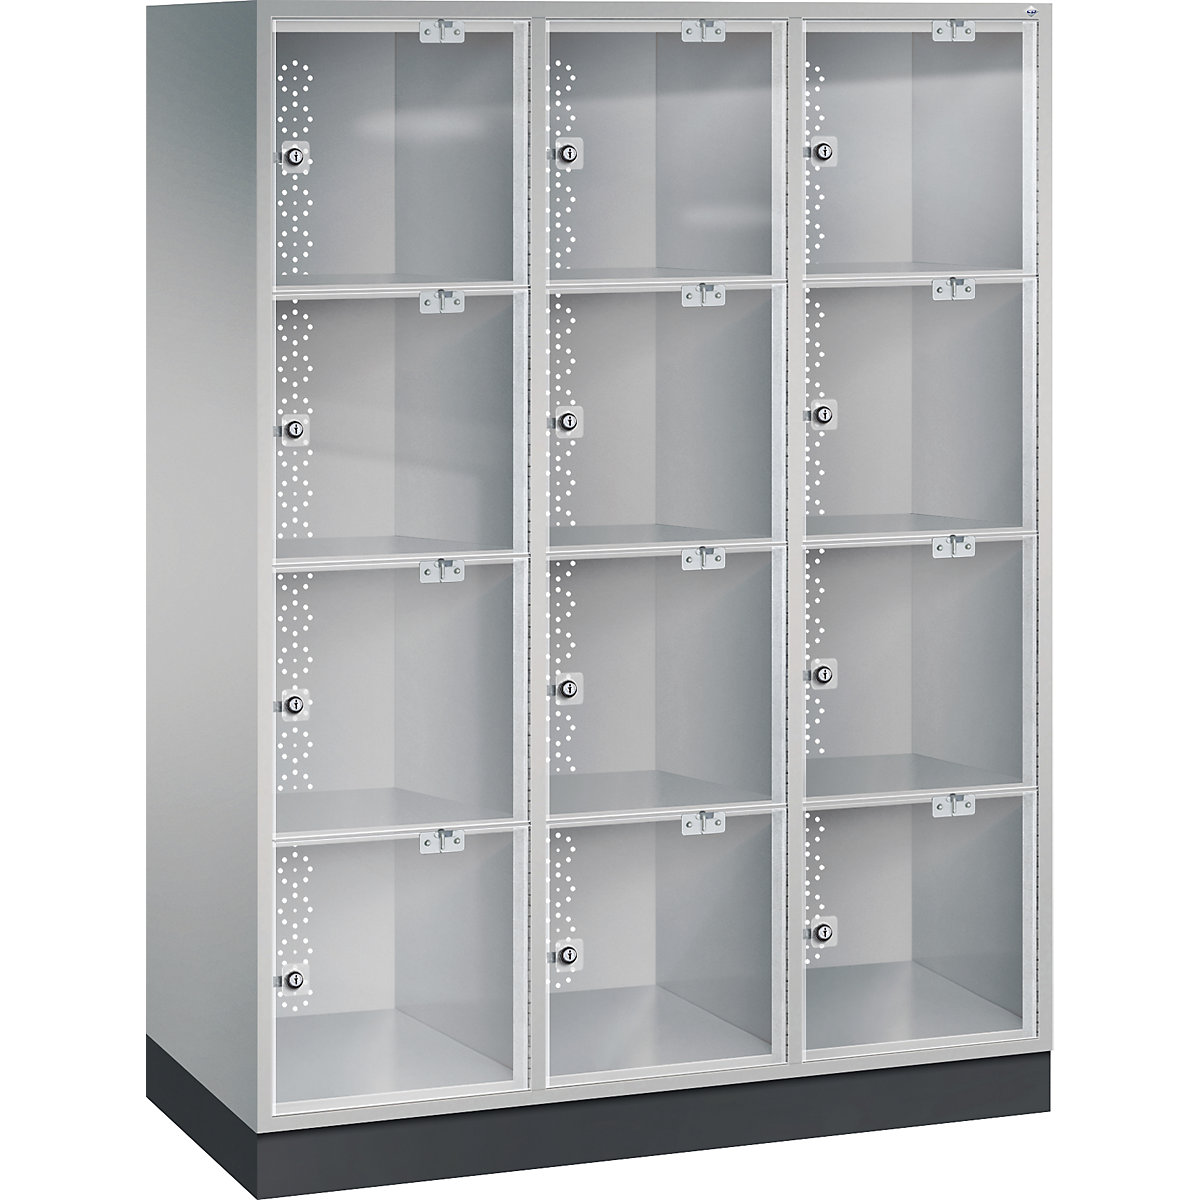 INTRO steel compartment locker with acrylic glass door – C+P, HxWxD 1750 x 1220 x 500 mm, compartment height 380 mm, 12 compartments, white aluminium body